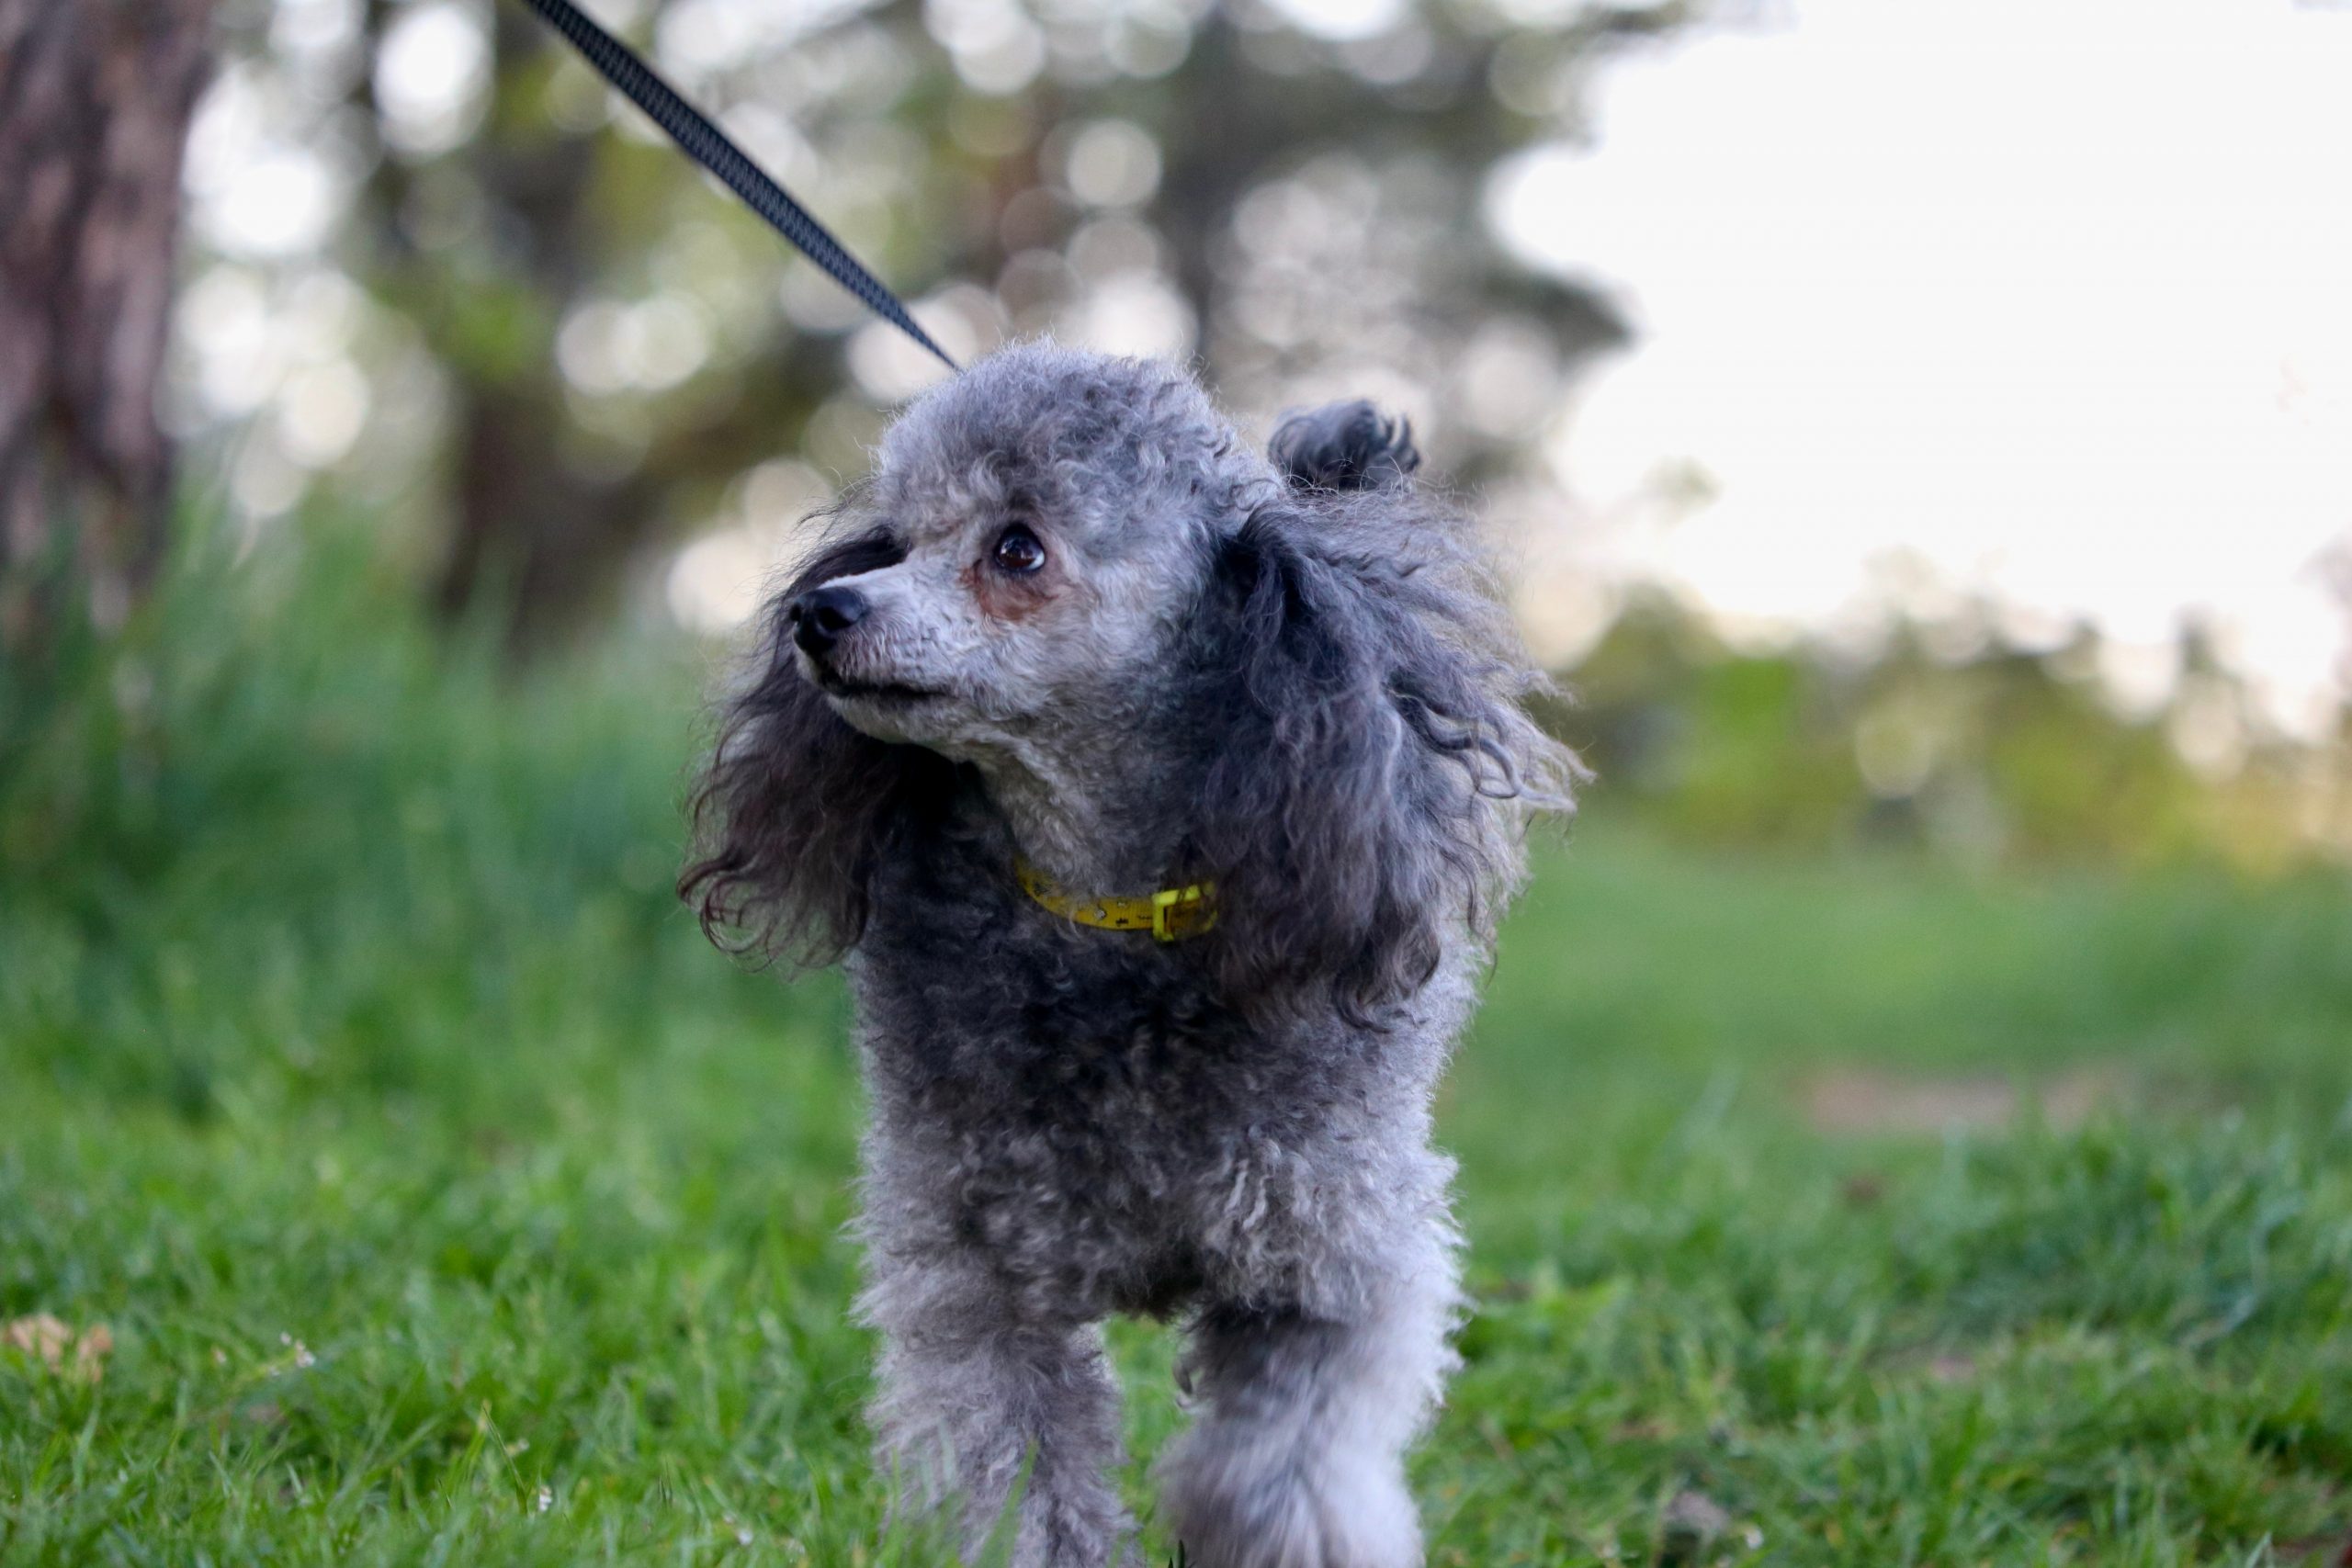 Photo,From,A,Walk,Of,A,Small,Toy,Poodle